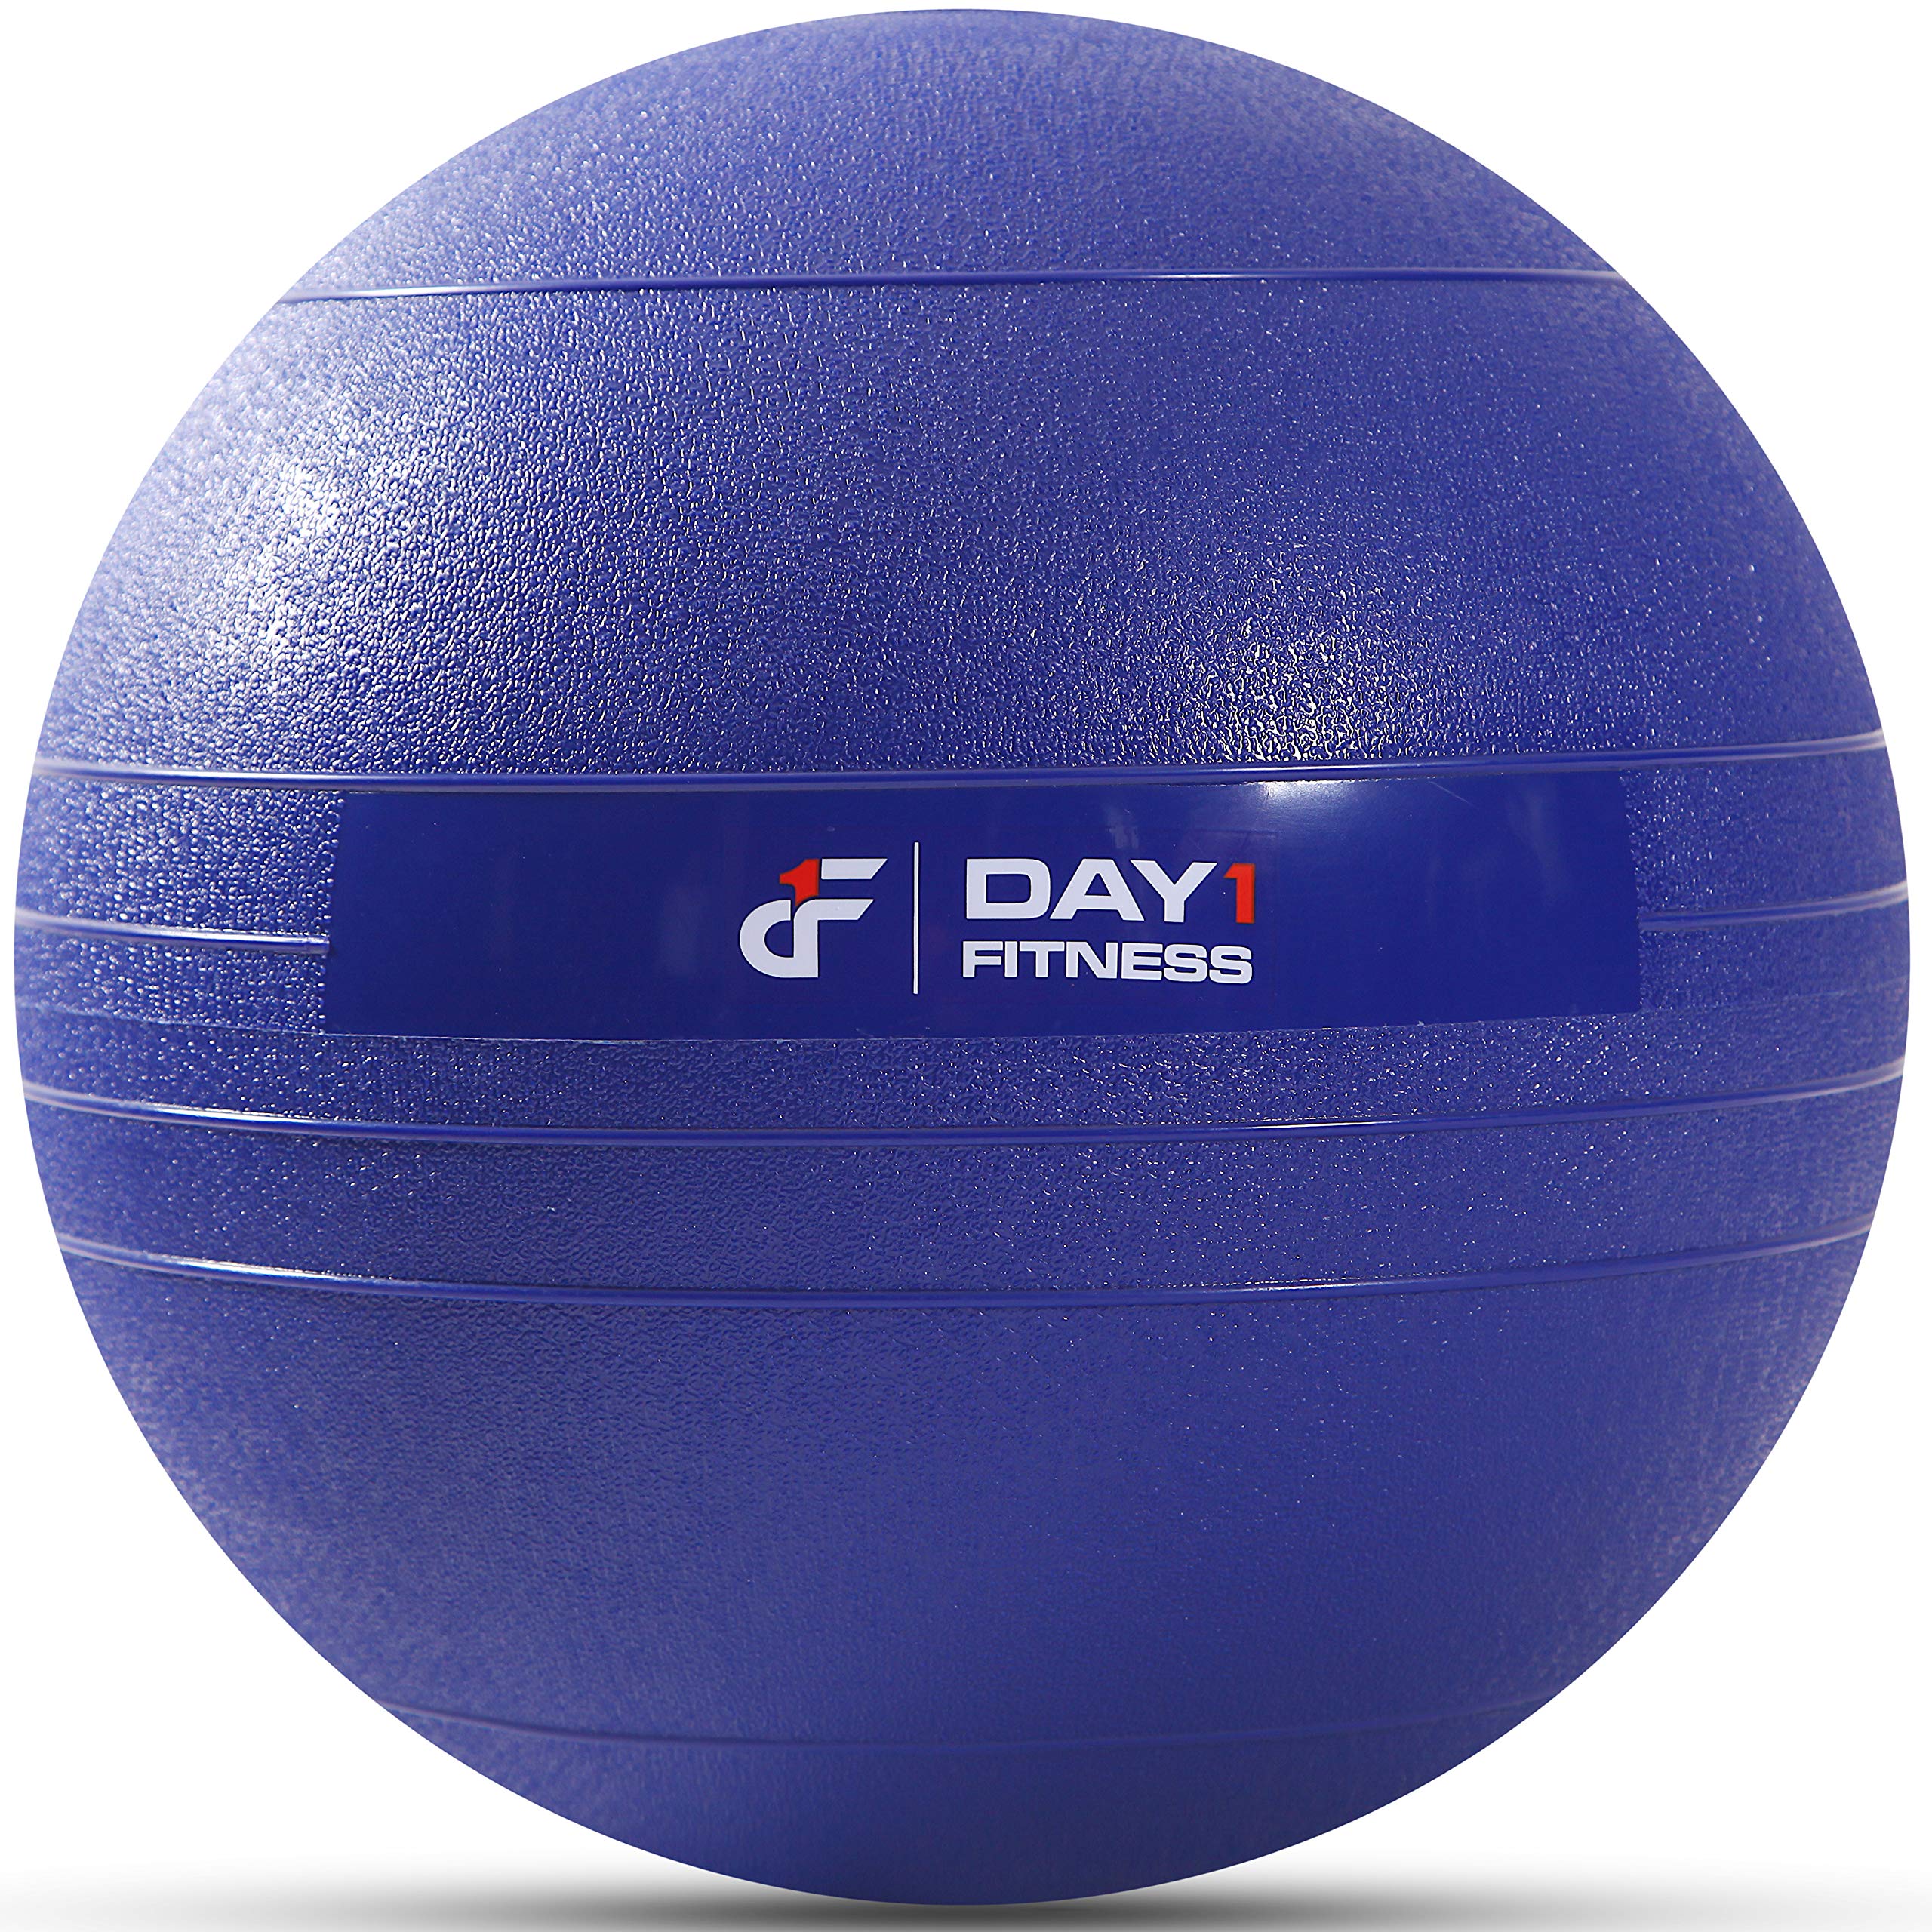 Weighted Slam Ball by Day 1 Fitness 45 lbs NAVY - No Bounce Medicine Ball - Gym Equipment Accessories for High Intensity